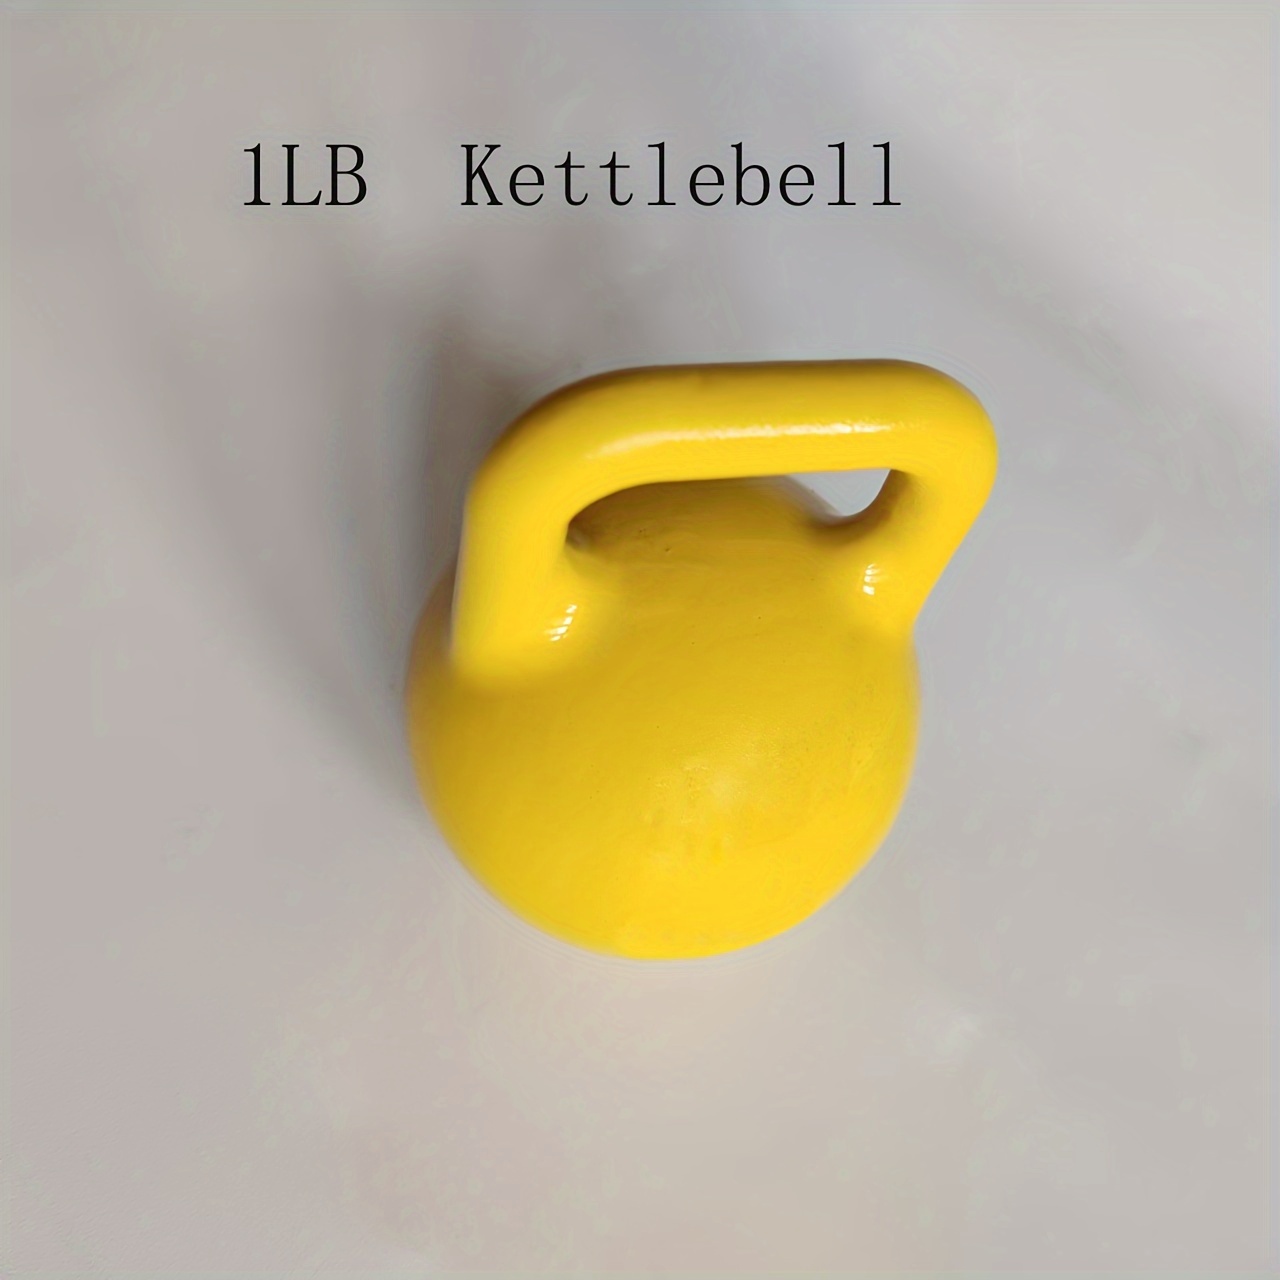  Workout Keychain, Fitness Keychain, Kettlebell I Can